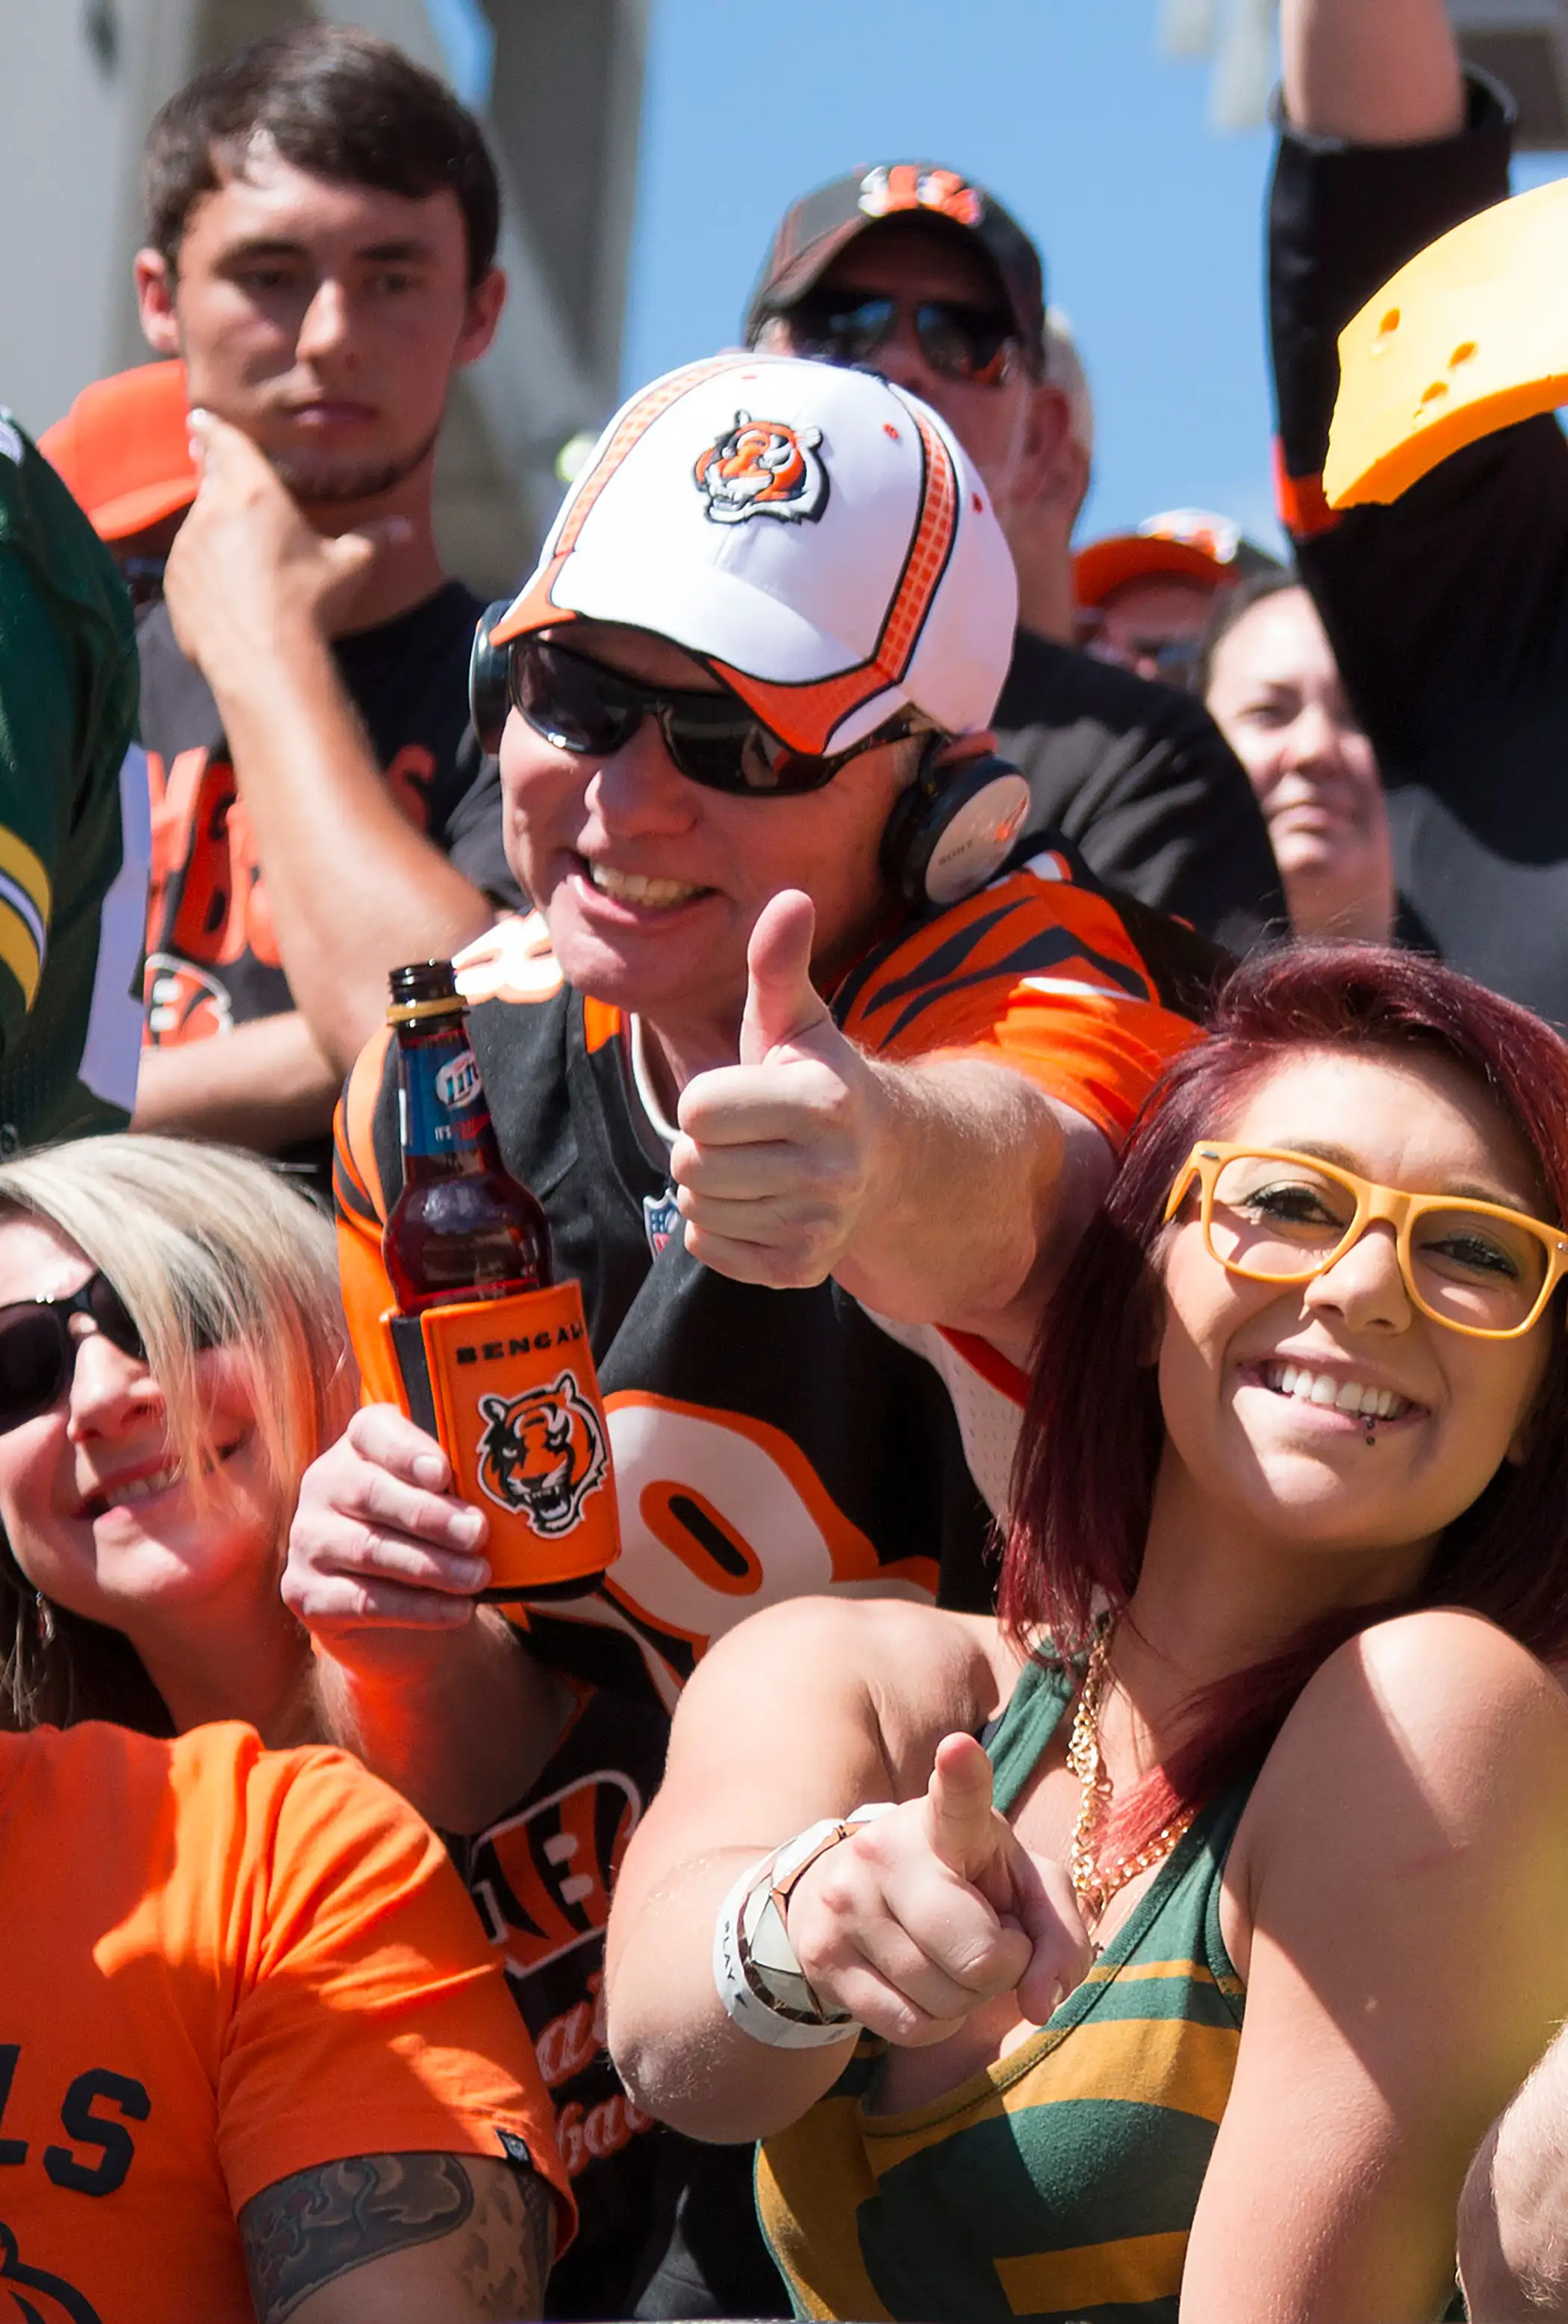 Fans of the Bengals enjoy the nice weather during the National Football League game between the Green Bay Packers and the Cincinnati Bengals at Paul Brown Stadium, September 22, 2013.